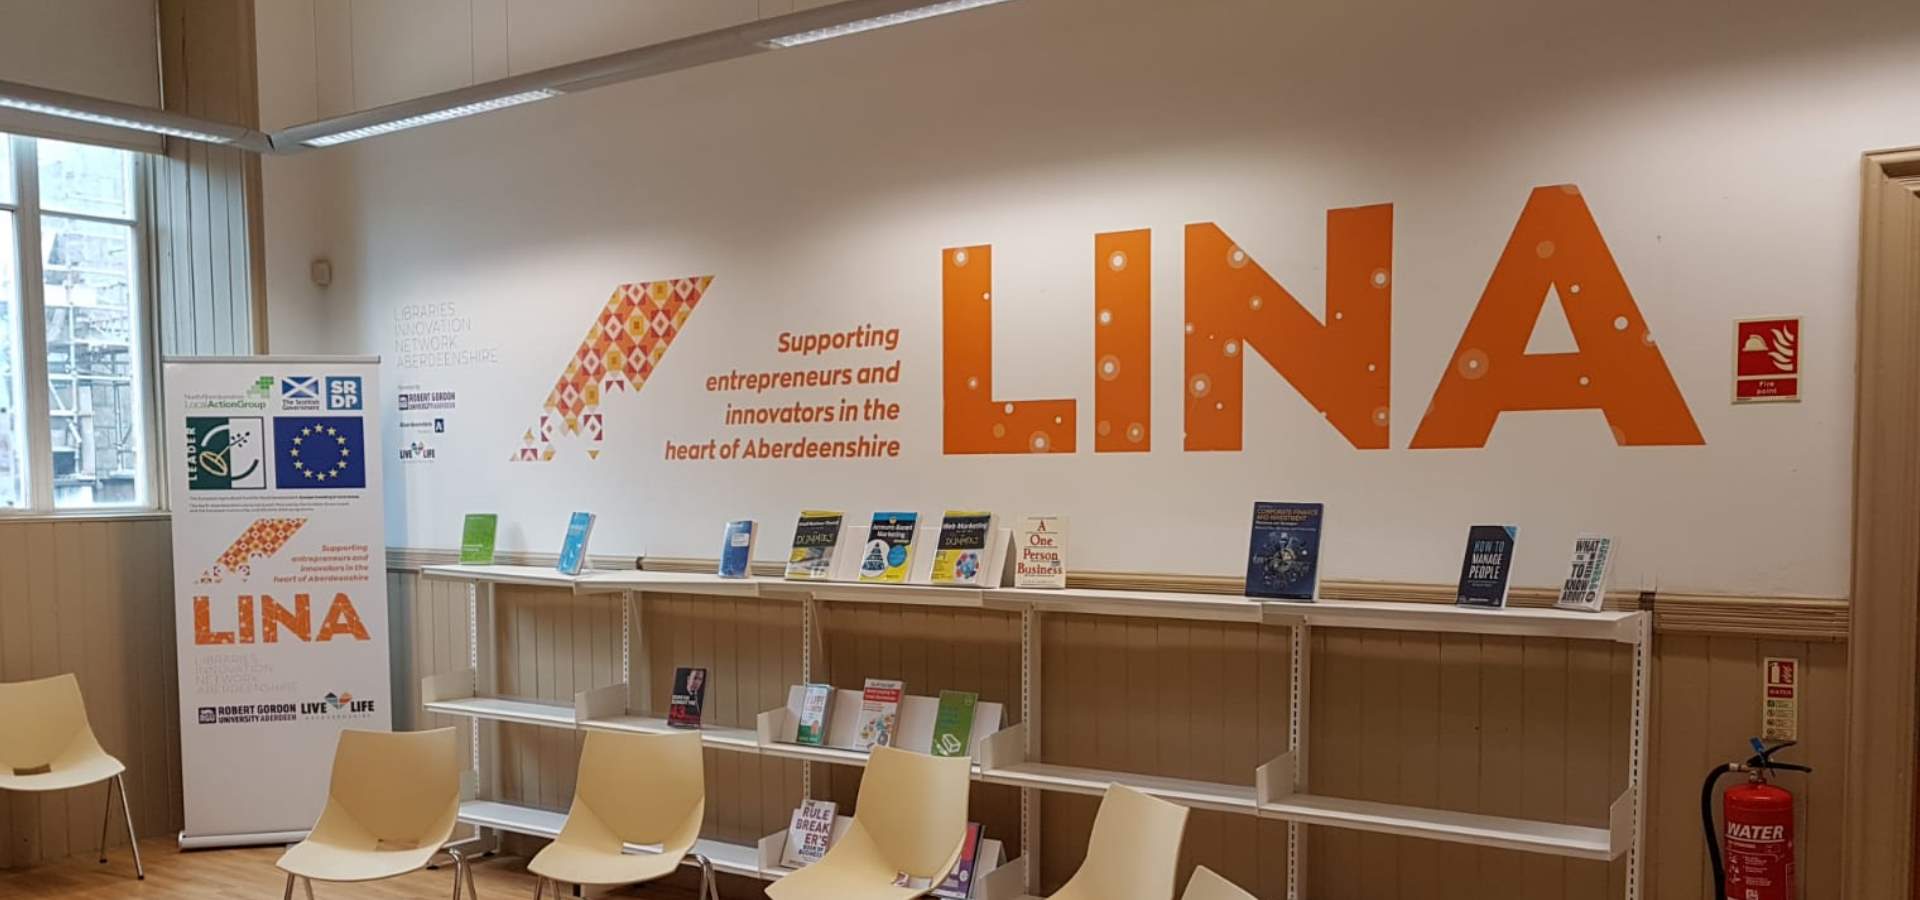 LINA Logo on the wall of the library